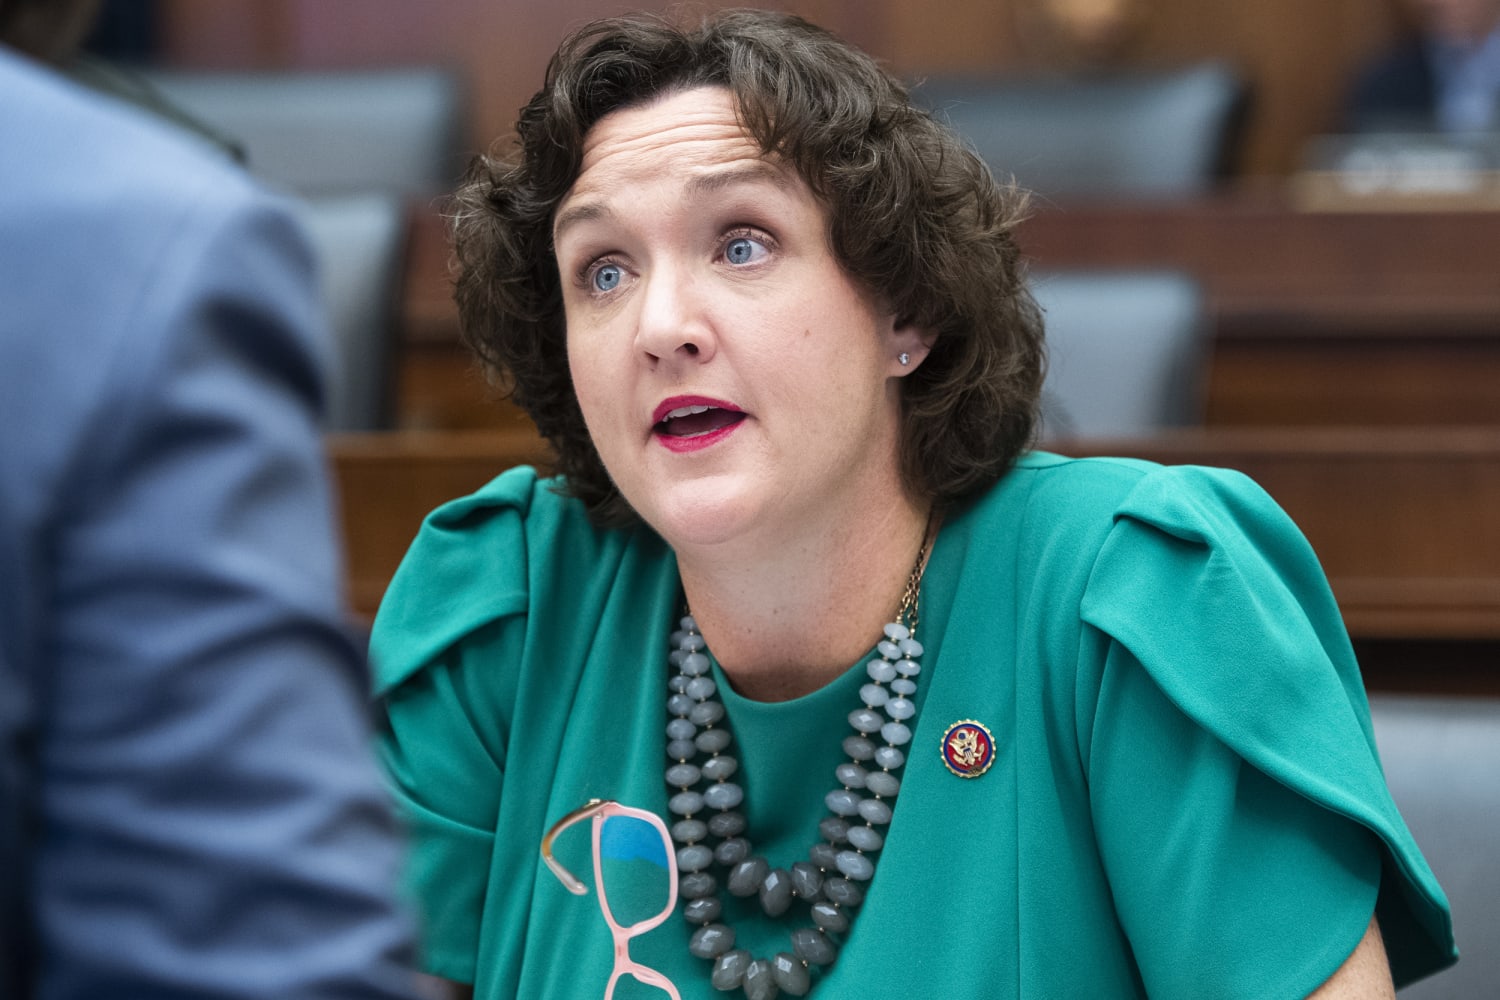 In a key swing district, Katie Porter clashes with GOP opponent over inflation and Orange County values foto foto